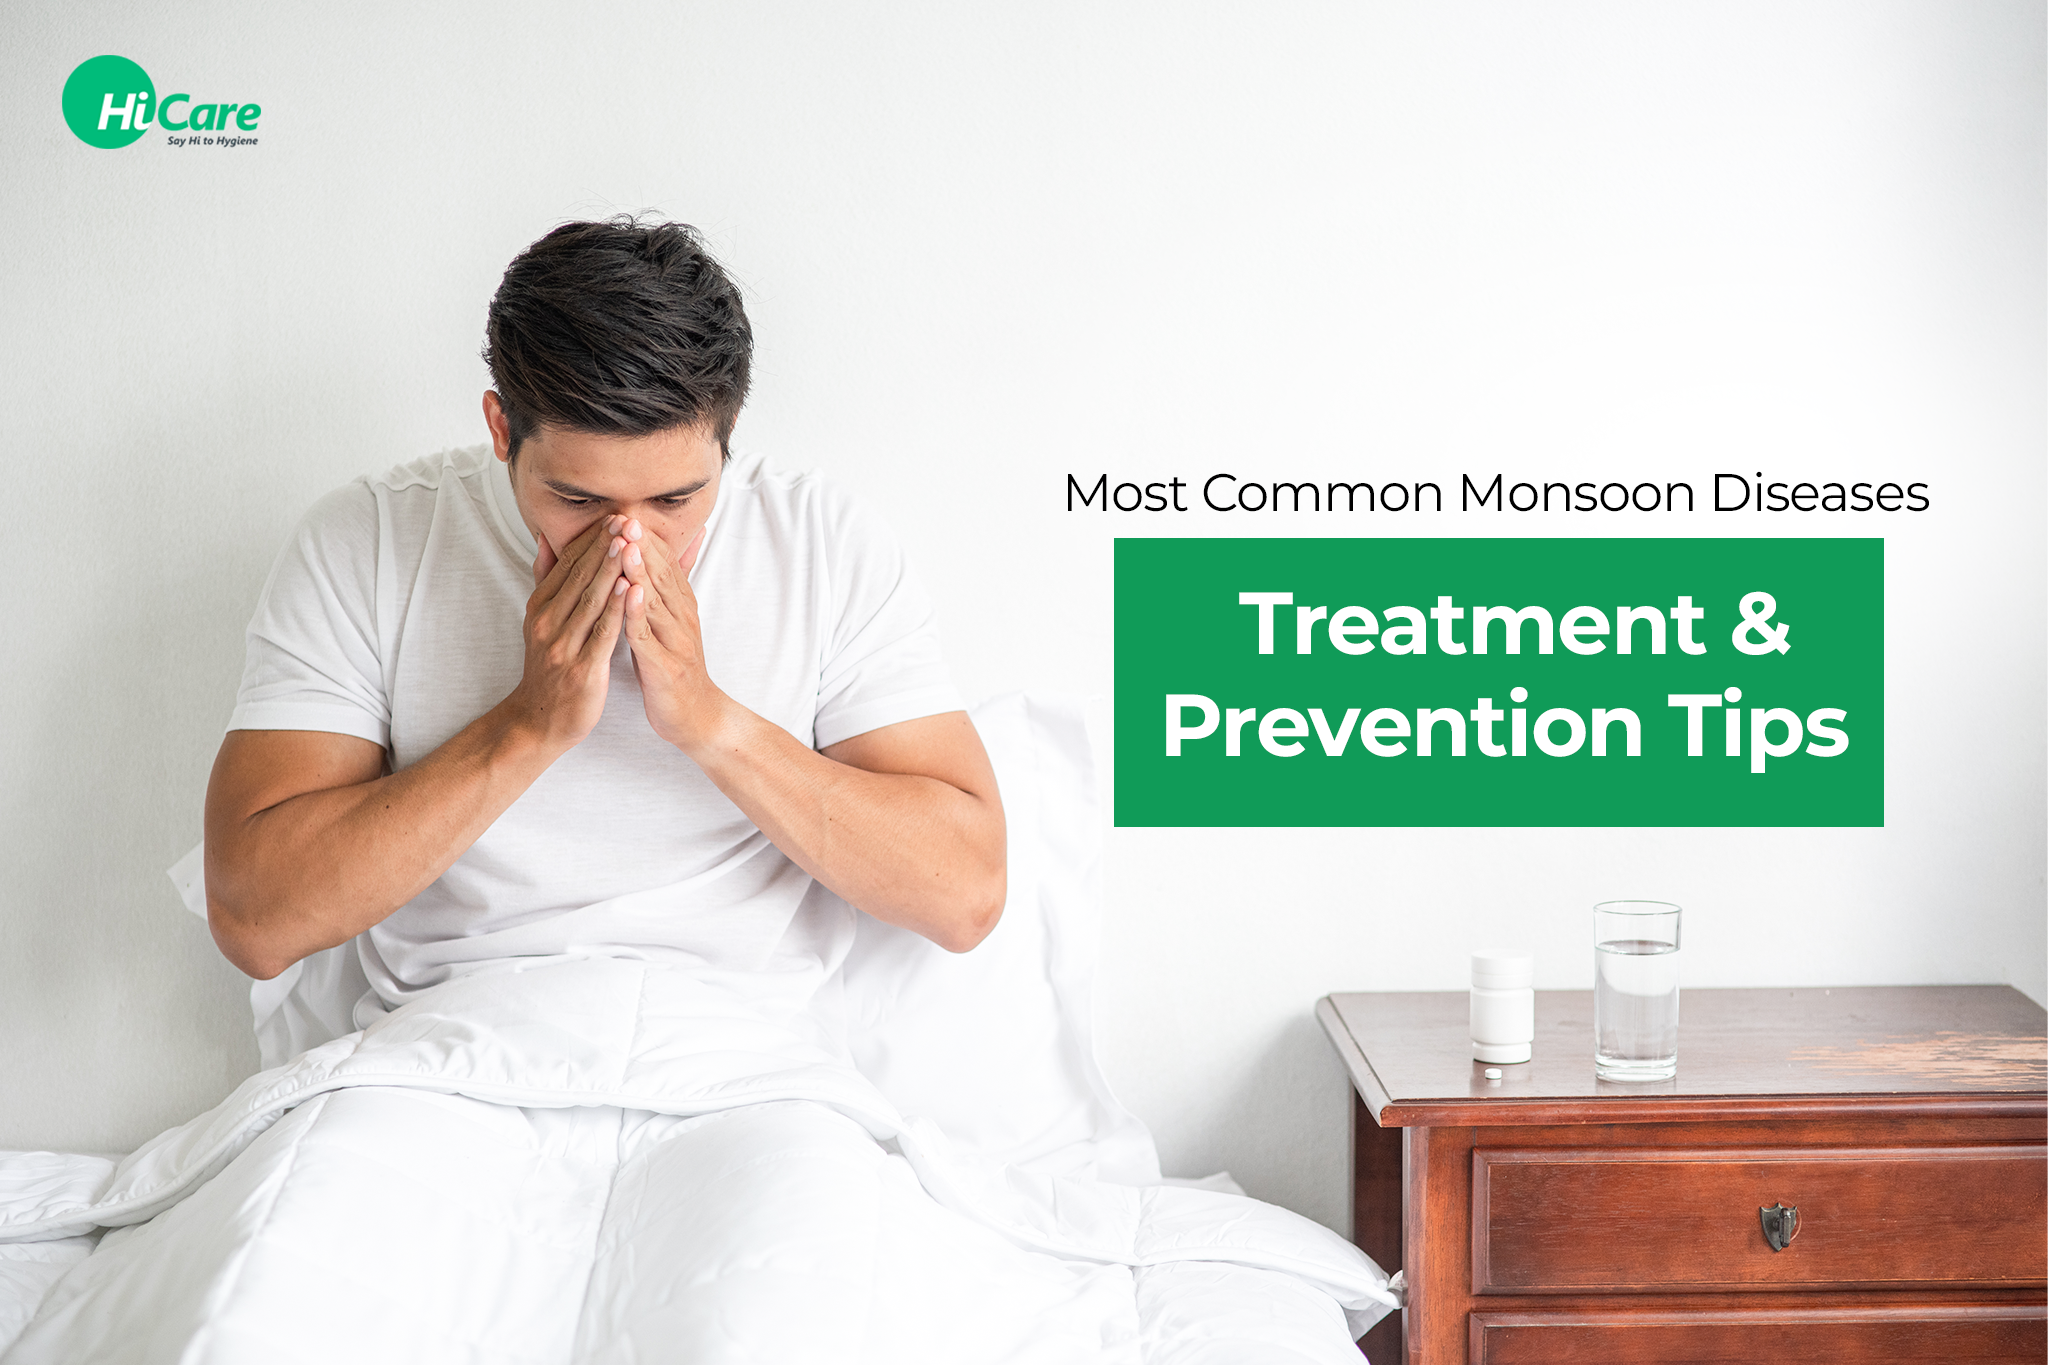 Treatment and Prevention tips for most common monsoon diseases